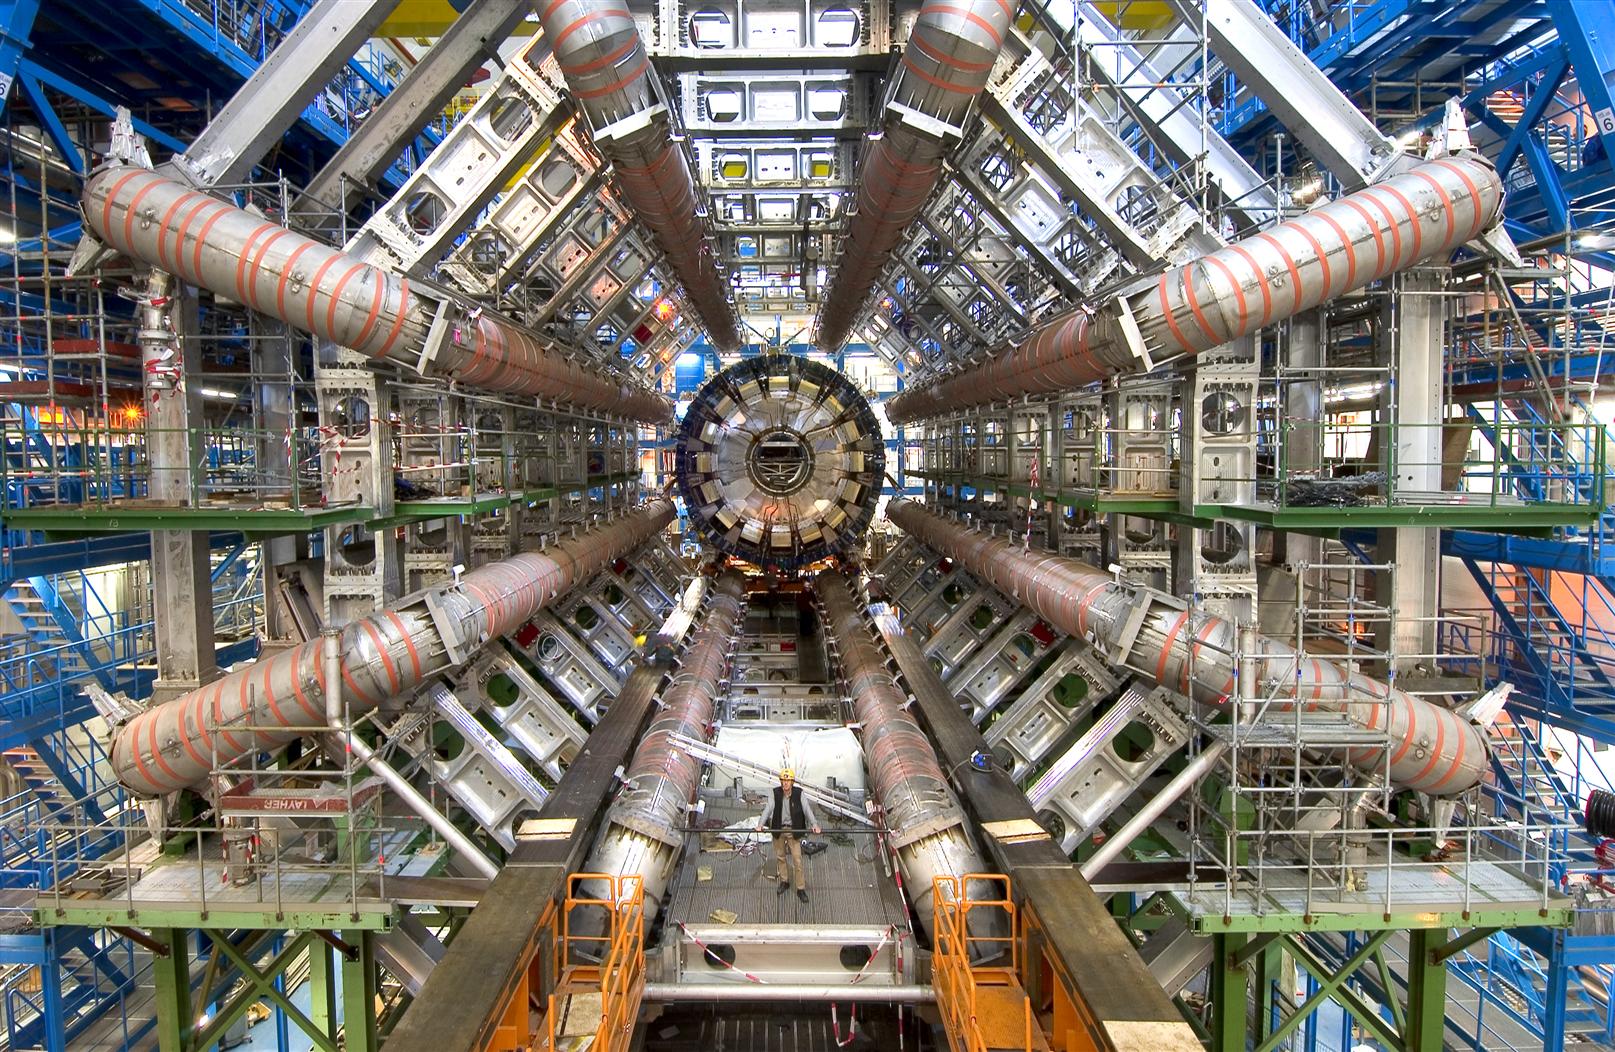 A view inside ATLAS during construction of the Large Hadron Collider.